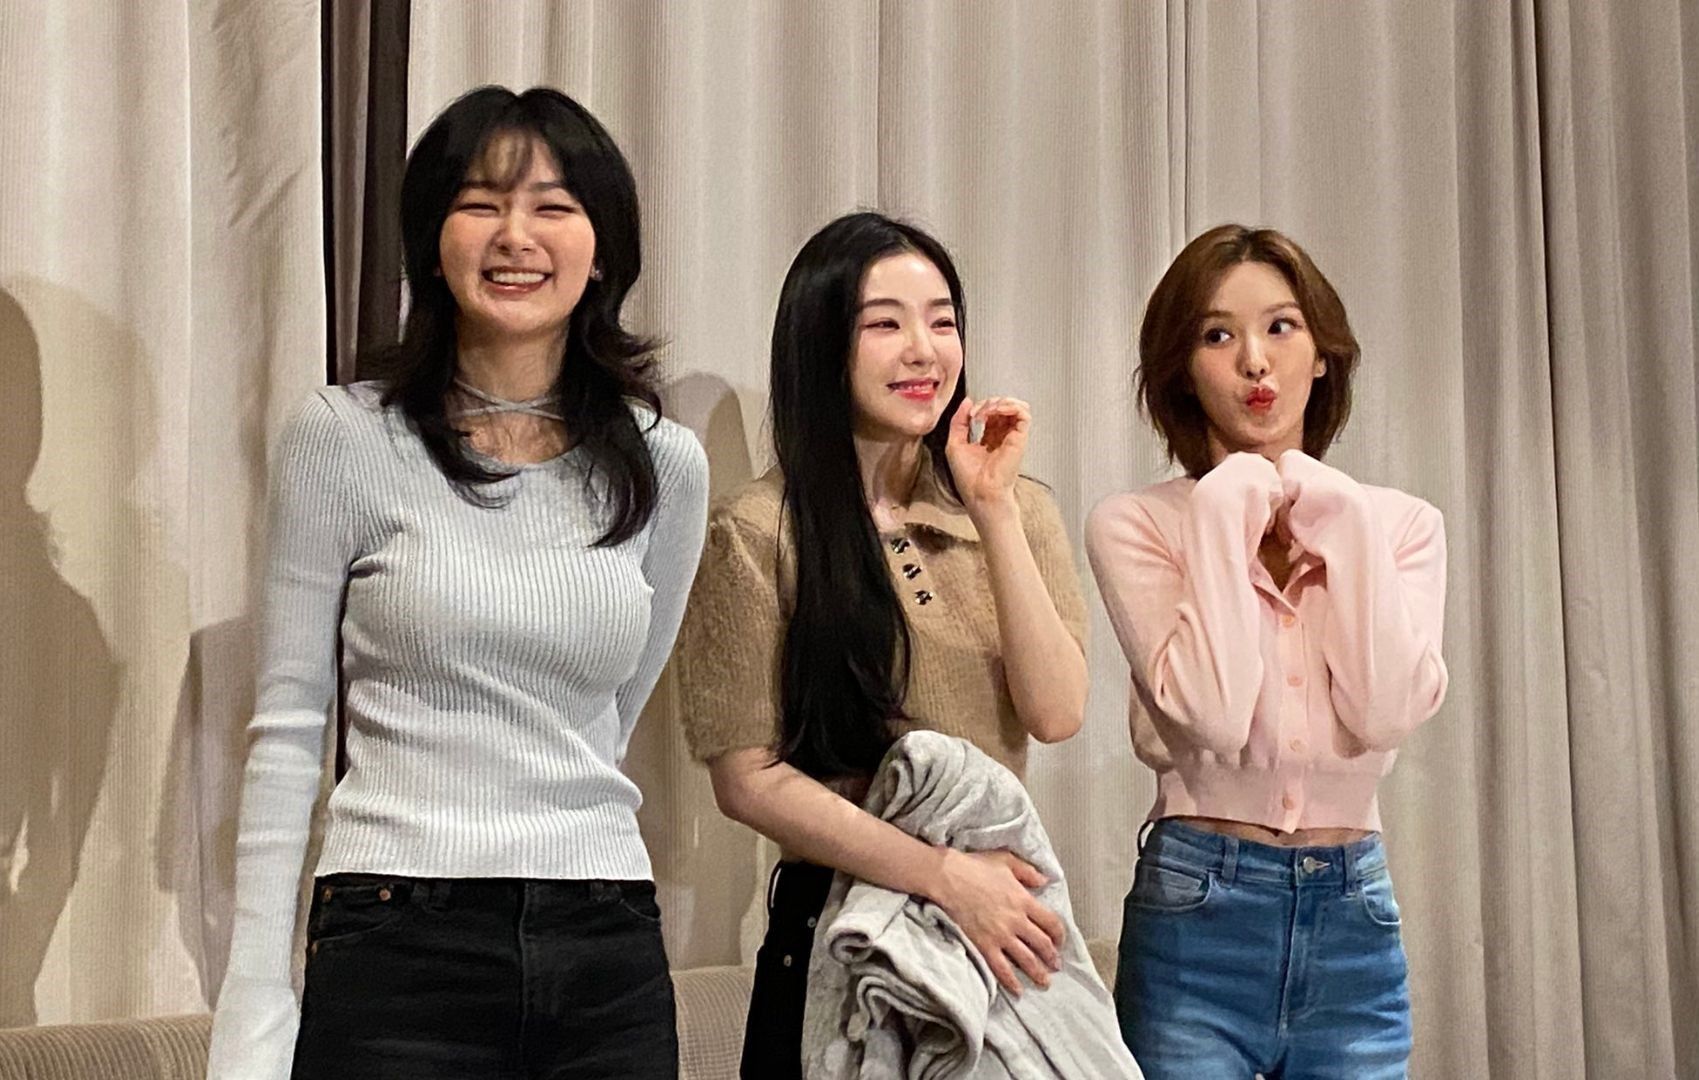 Red Velvet hopeful for another album as 10th year approaches